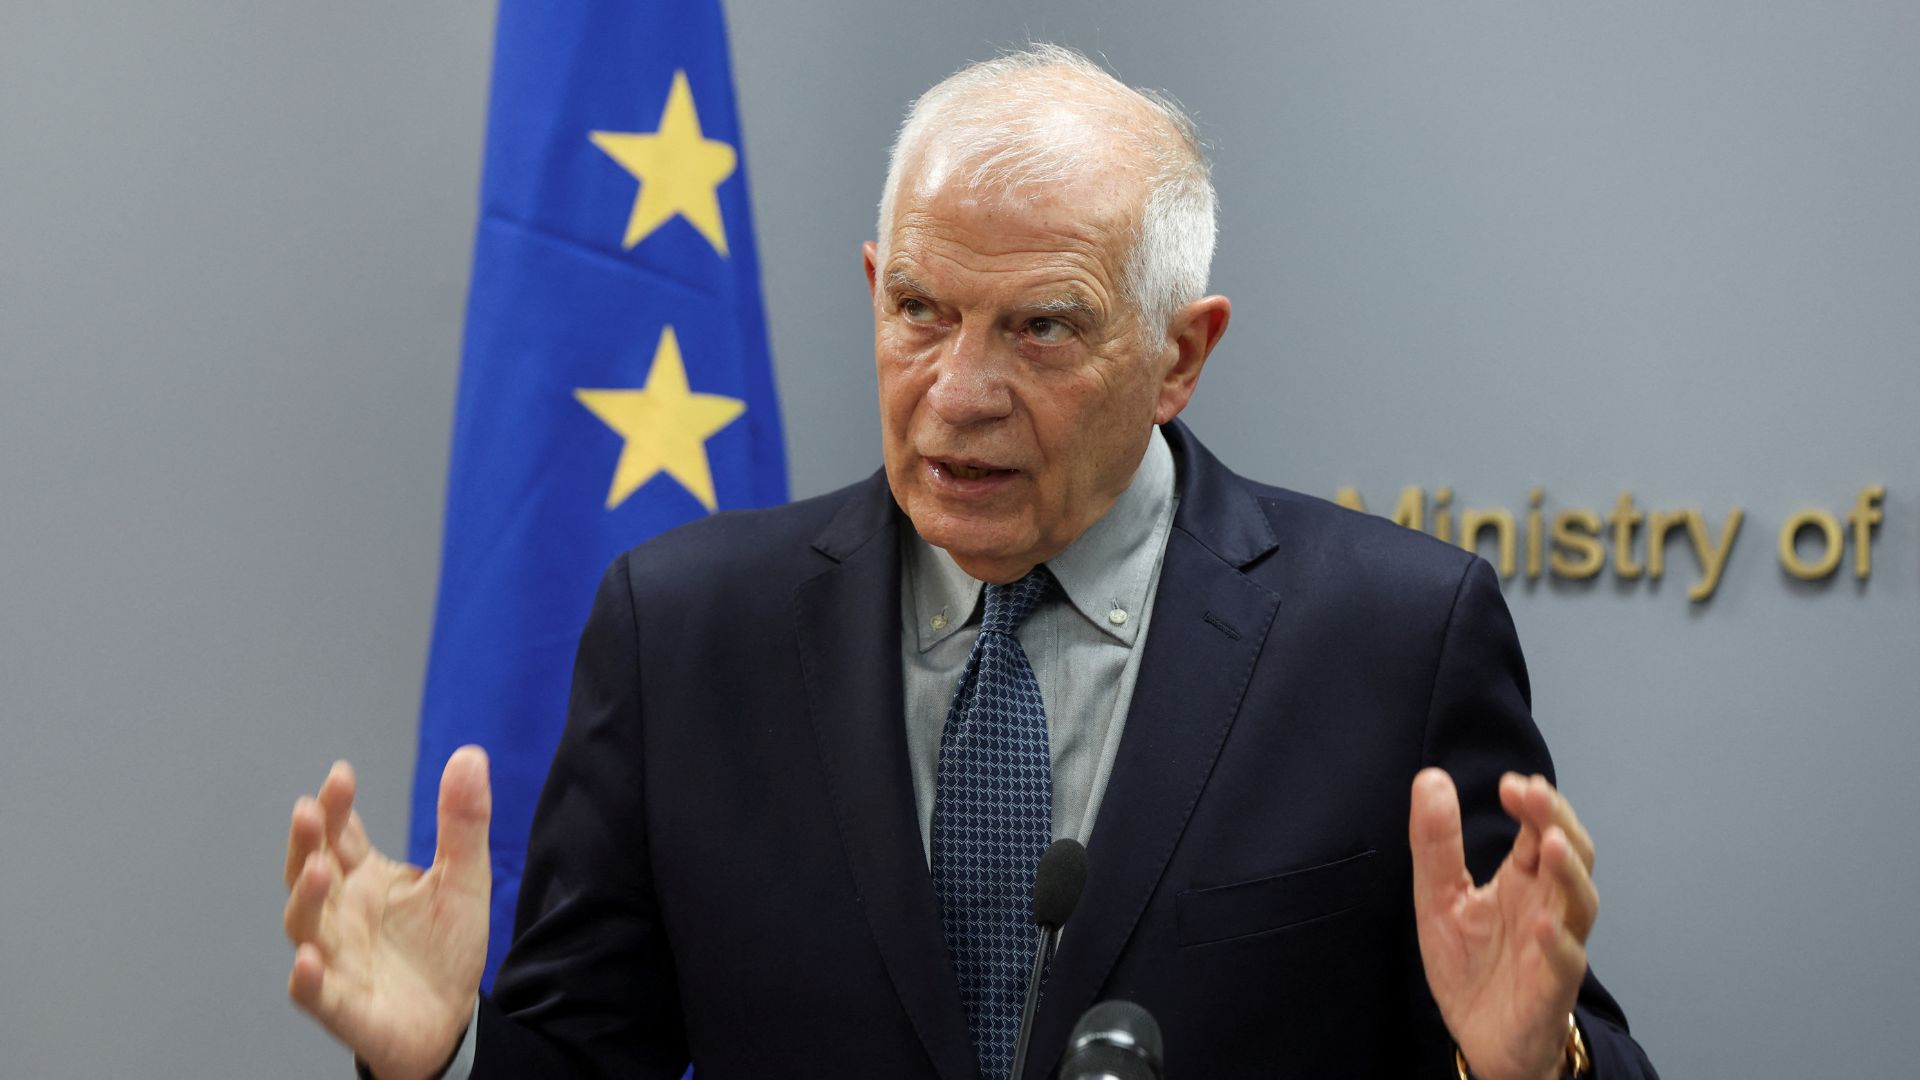 The EU's foreign policy chief Josep Borrell is urging leaders in the Middle East to prevent the Israel-Hamas conflict spreading throughout the region./Mohamed Azakir/Reuters